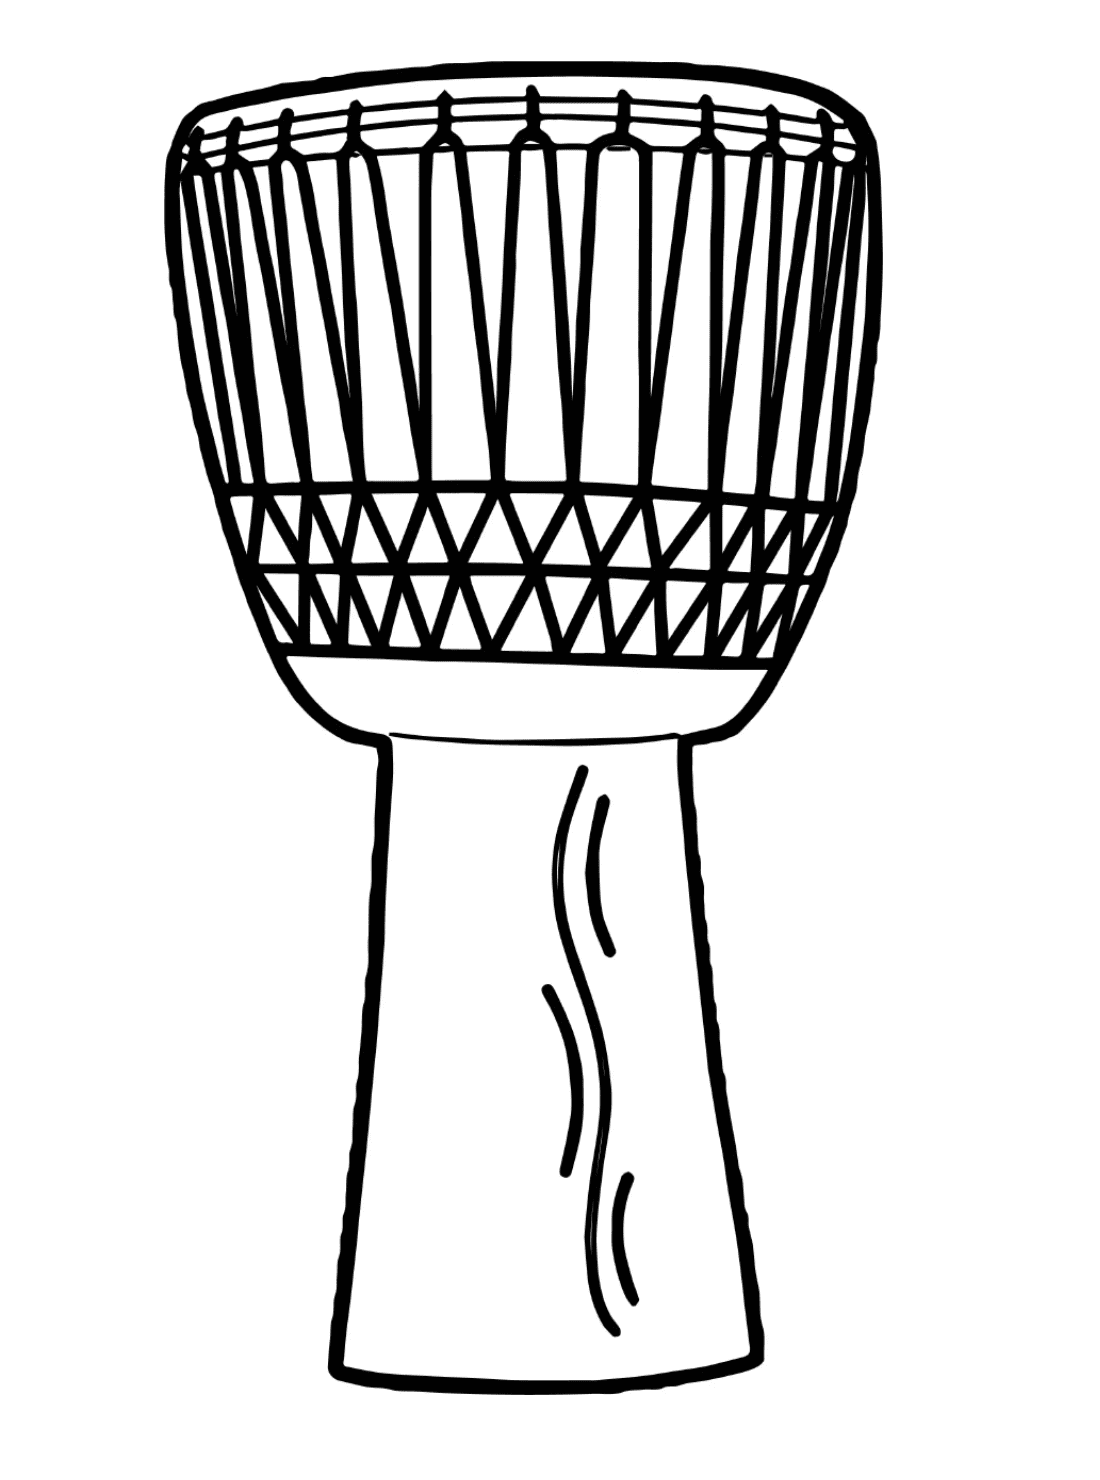 Drum circle coloring pages